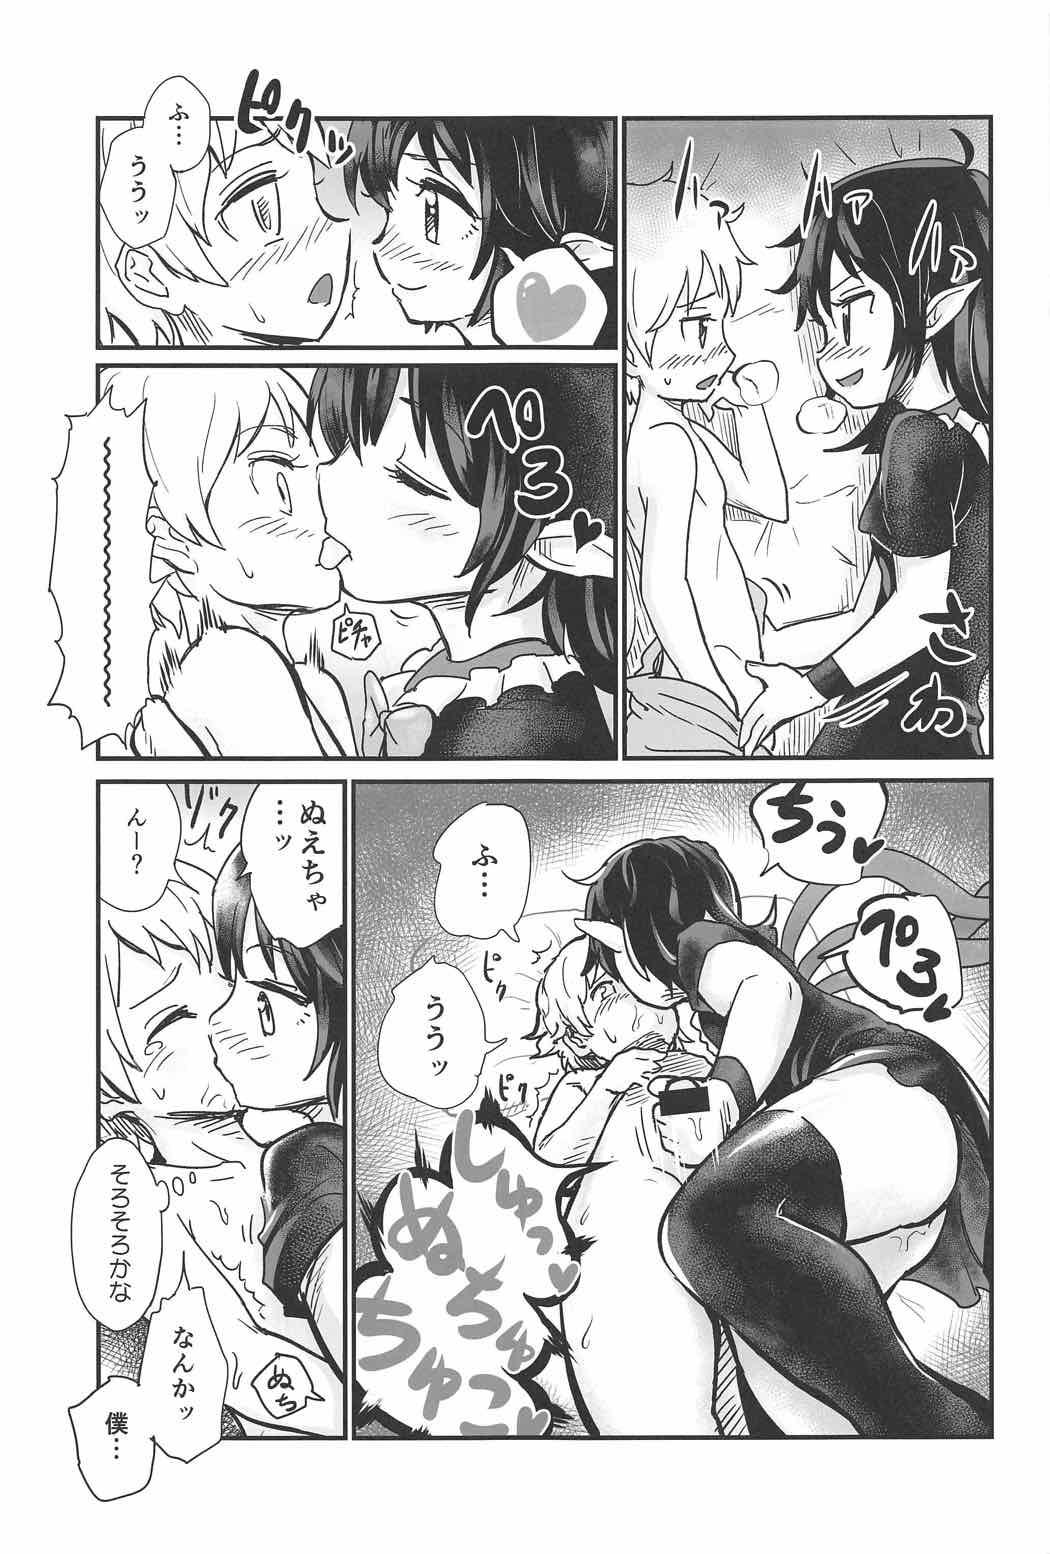 Best Blowjobs Ever Nue to Shounen - Touhou project Celebrity Sex Scene - Page 10